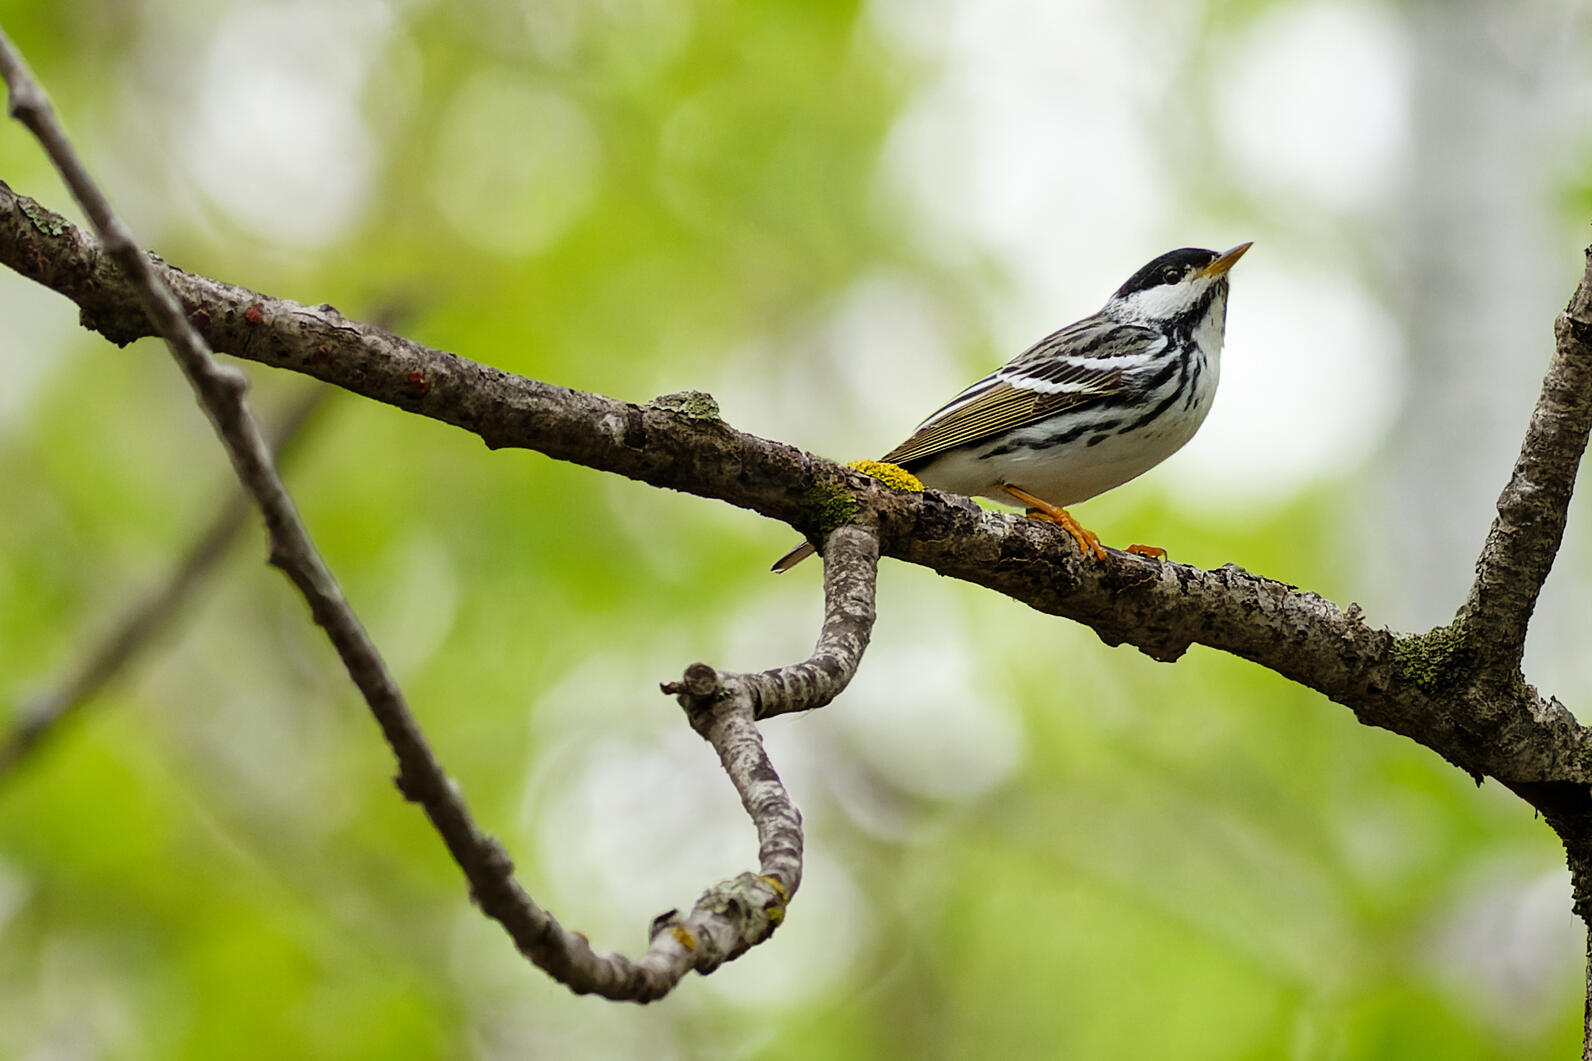 Small bird perched on branch